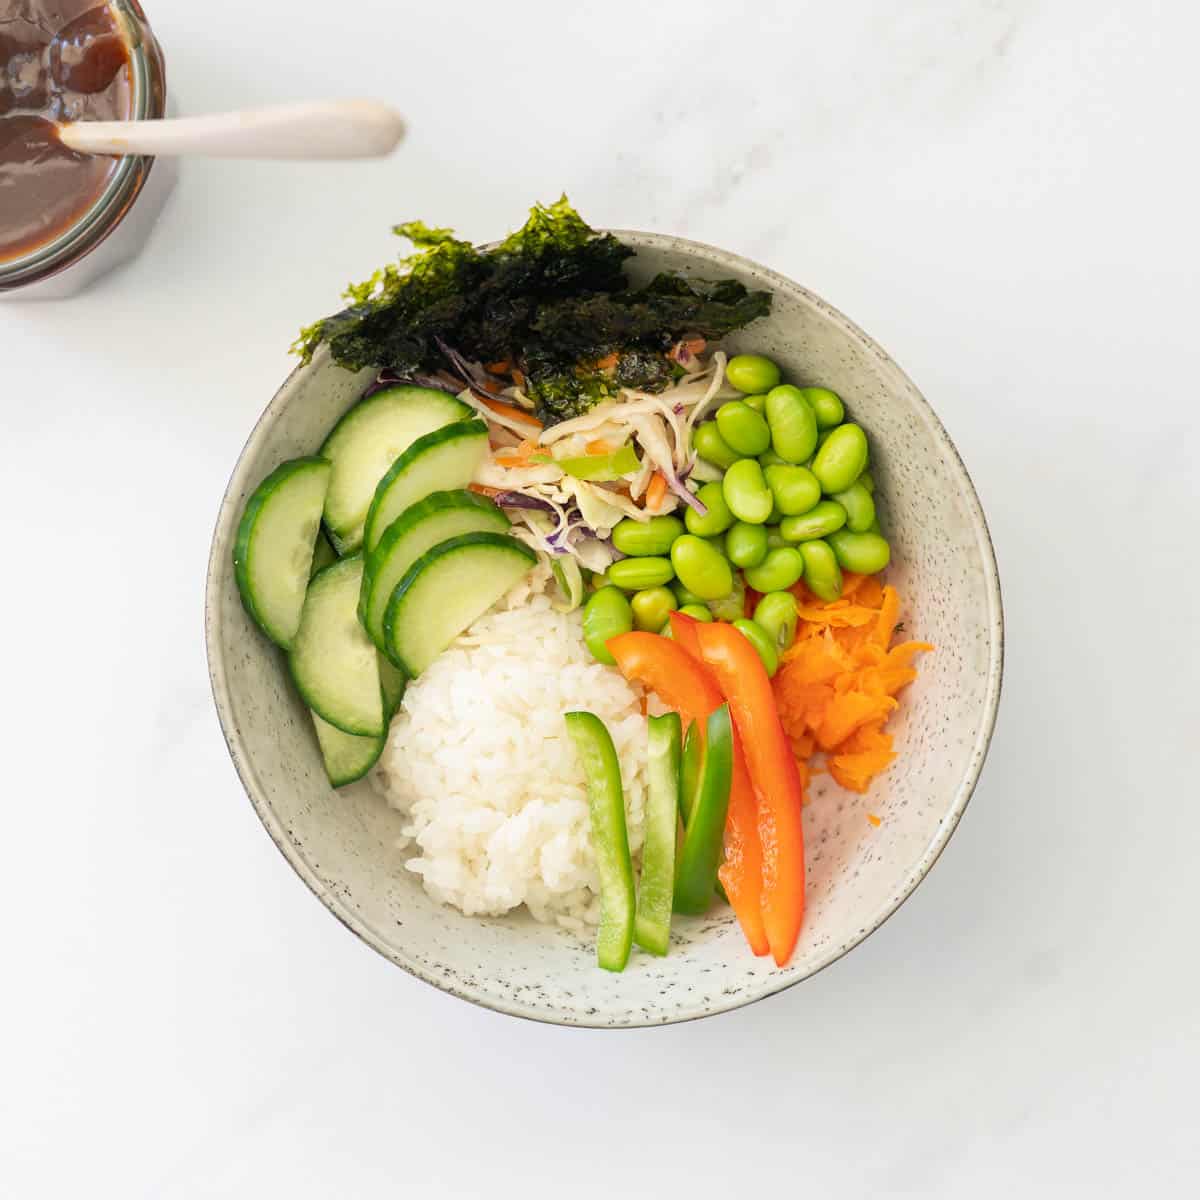 Rice, vegetables and toasted seaweed in a ceramic bowl.